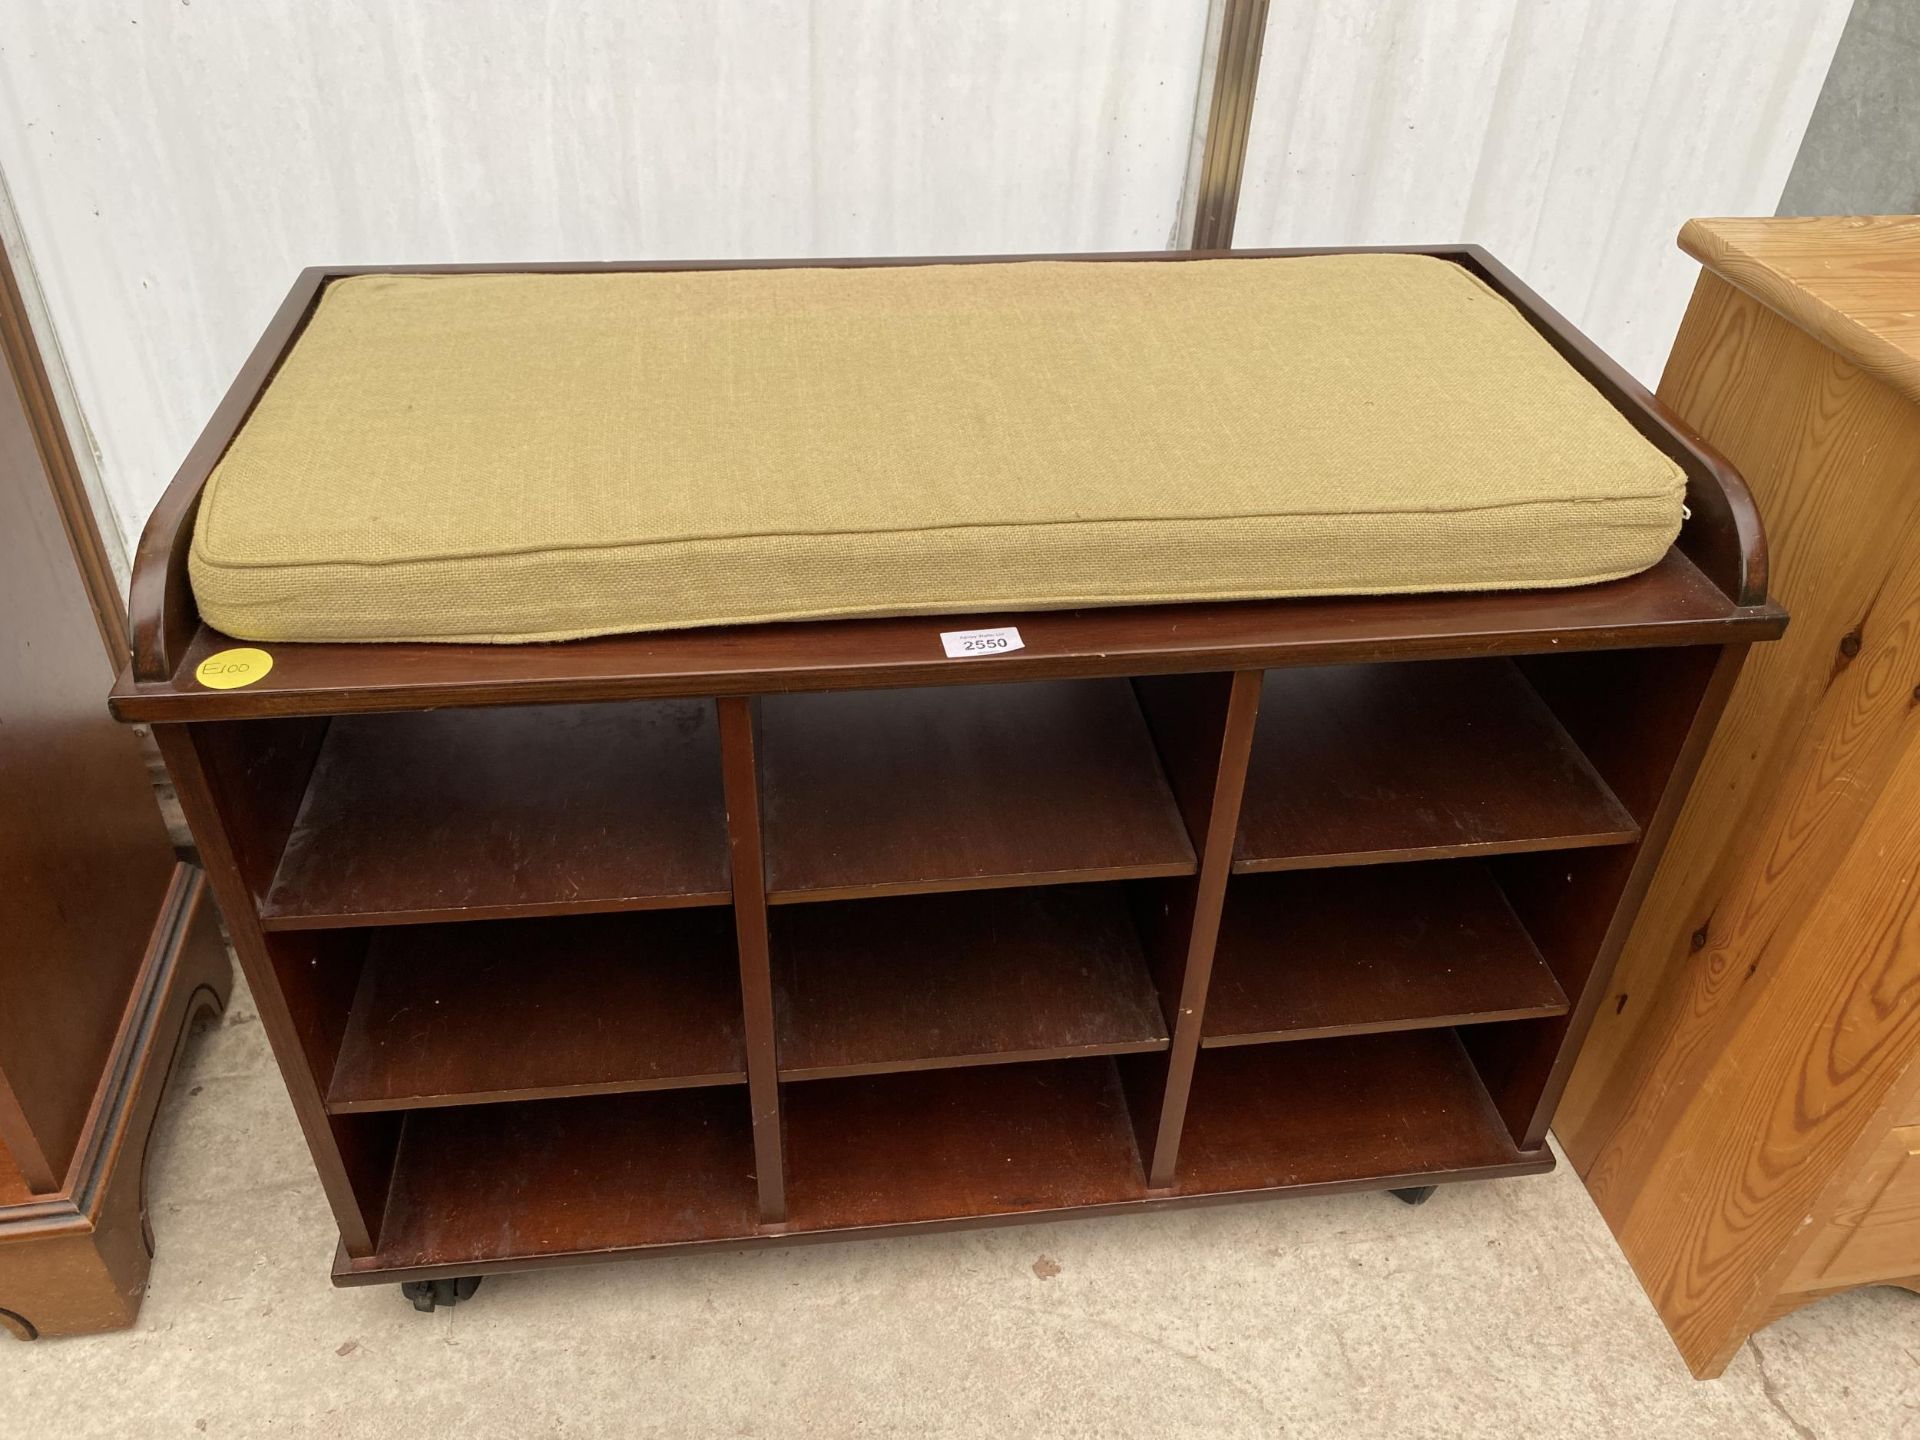 A MODERN NINE DIVISION OPEN STORAGE UNIT WITH CUSHION TOP, 31" WIDE